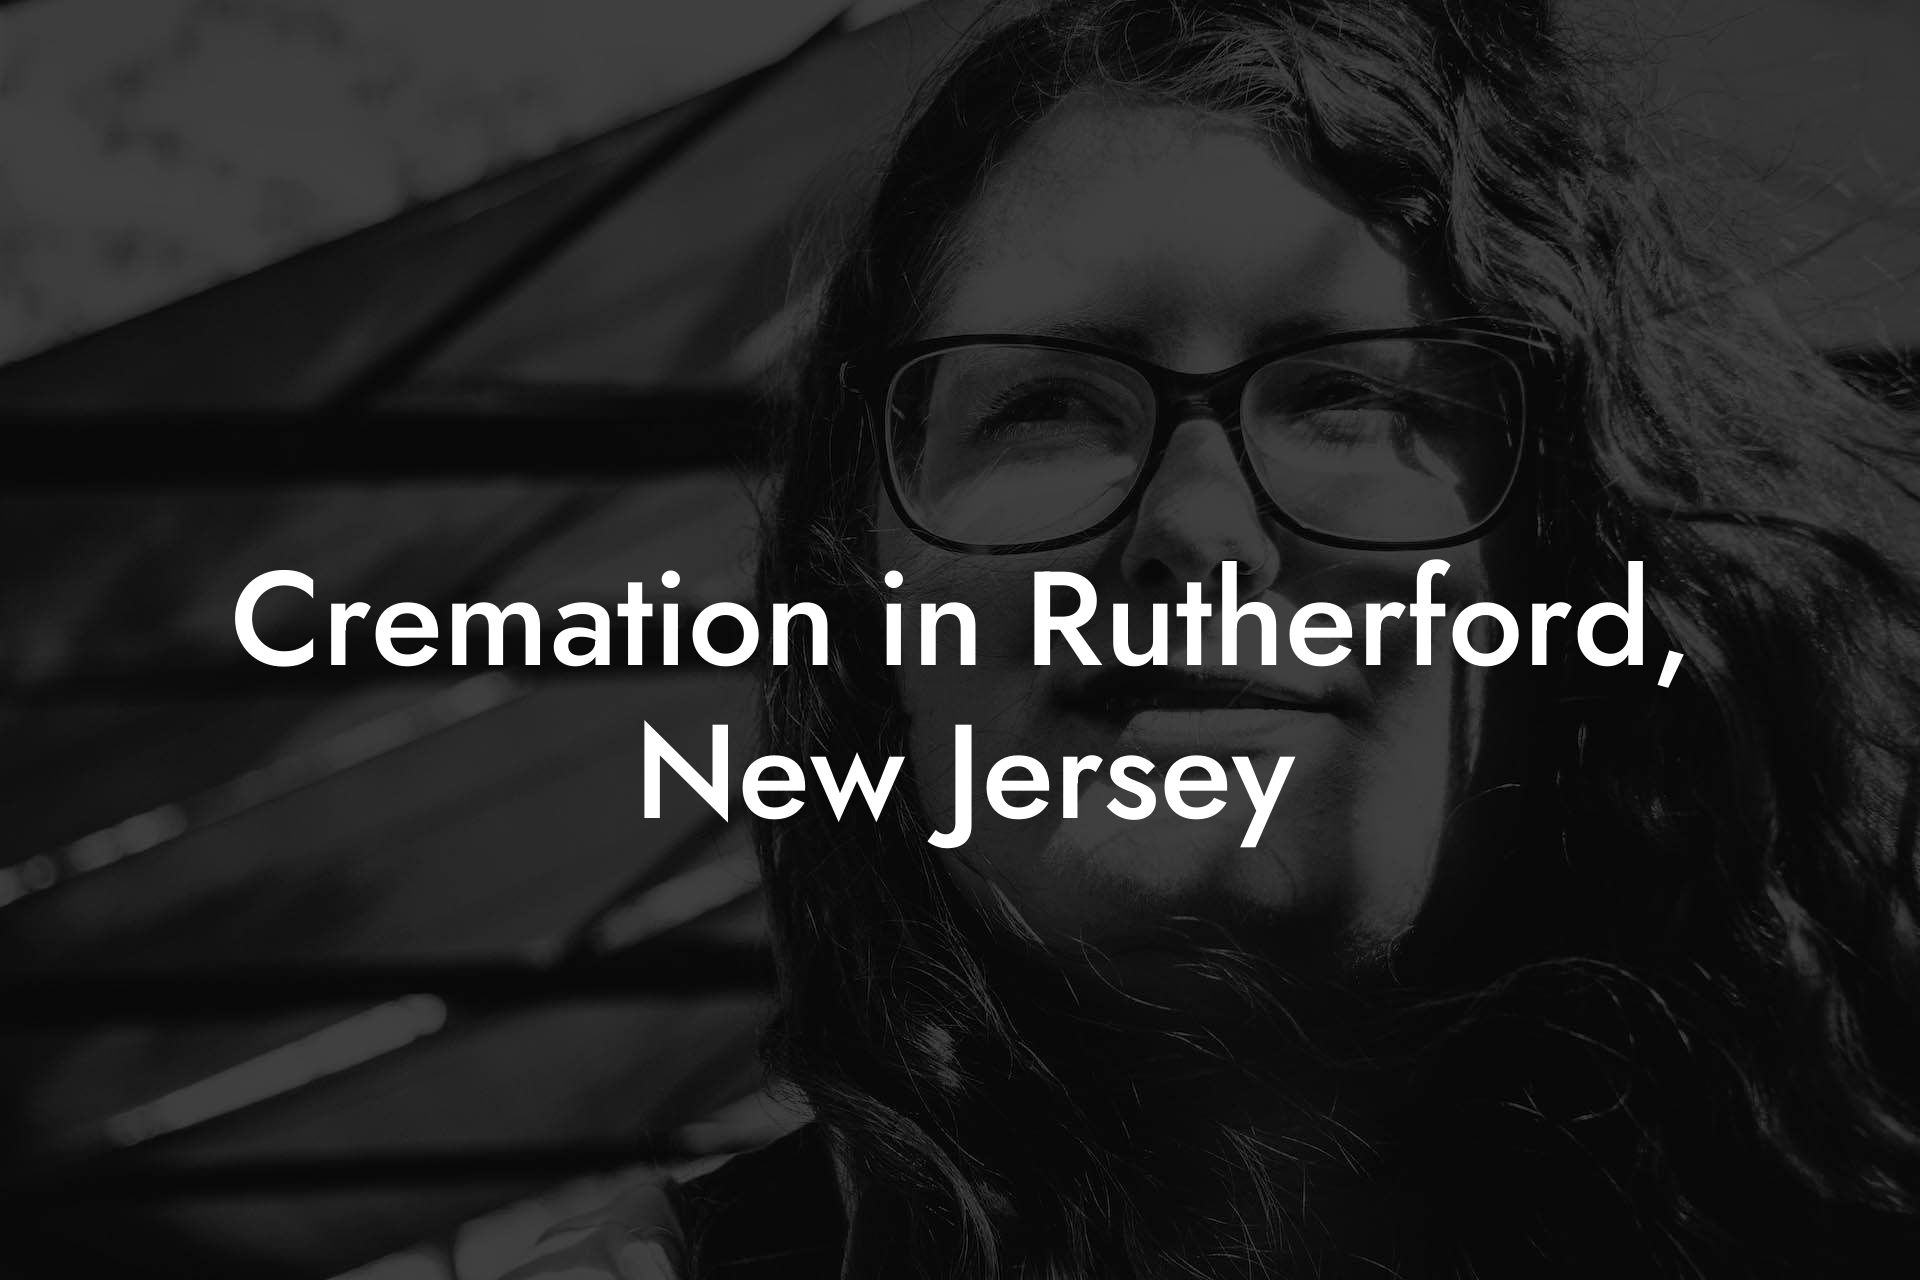 Cremation in Rutherford, New Jersey